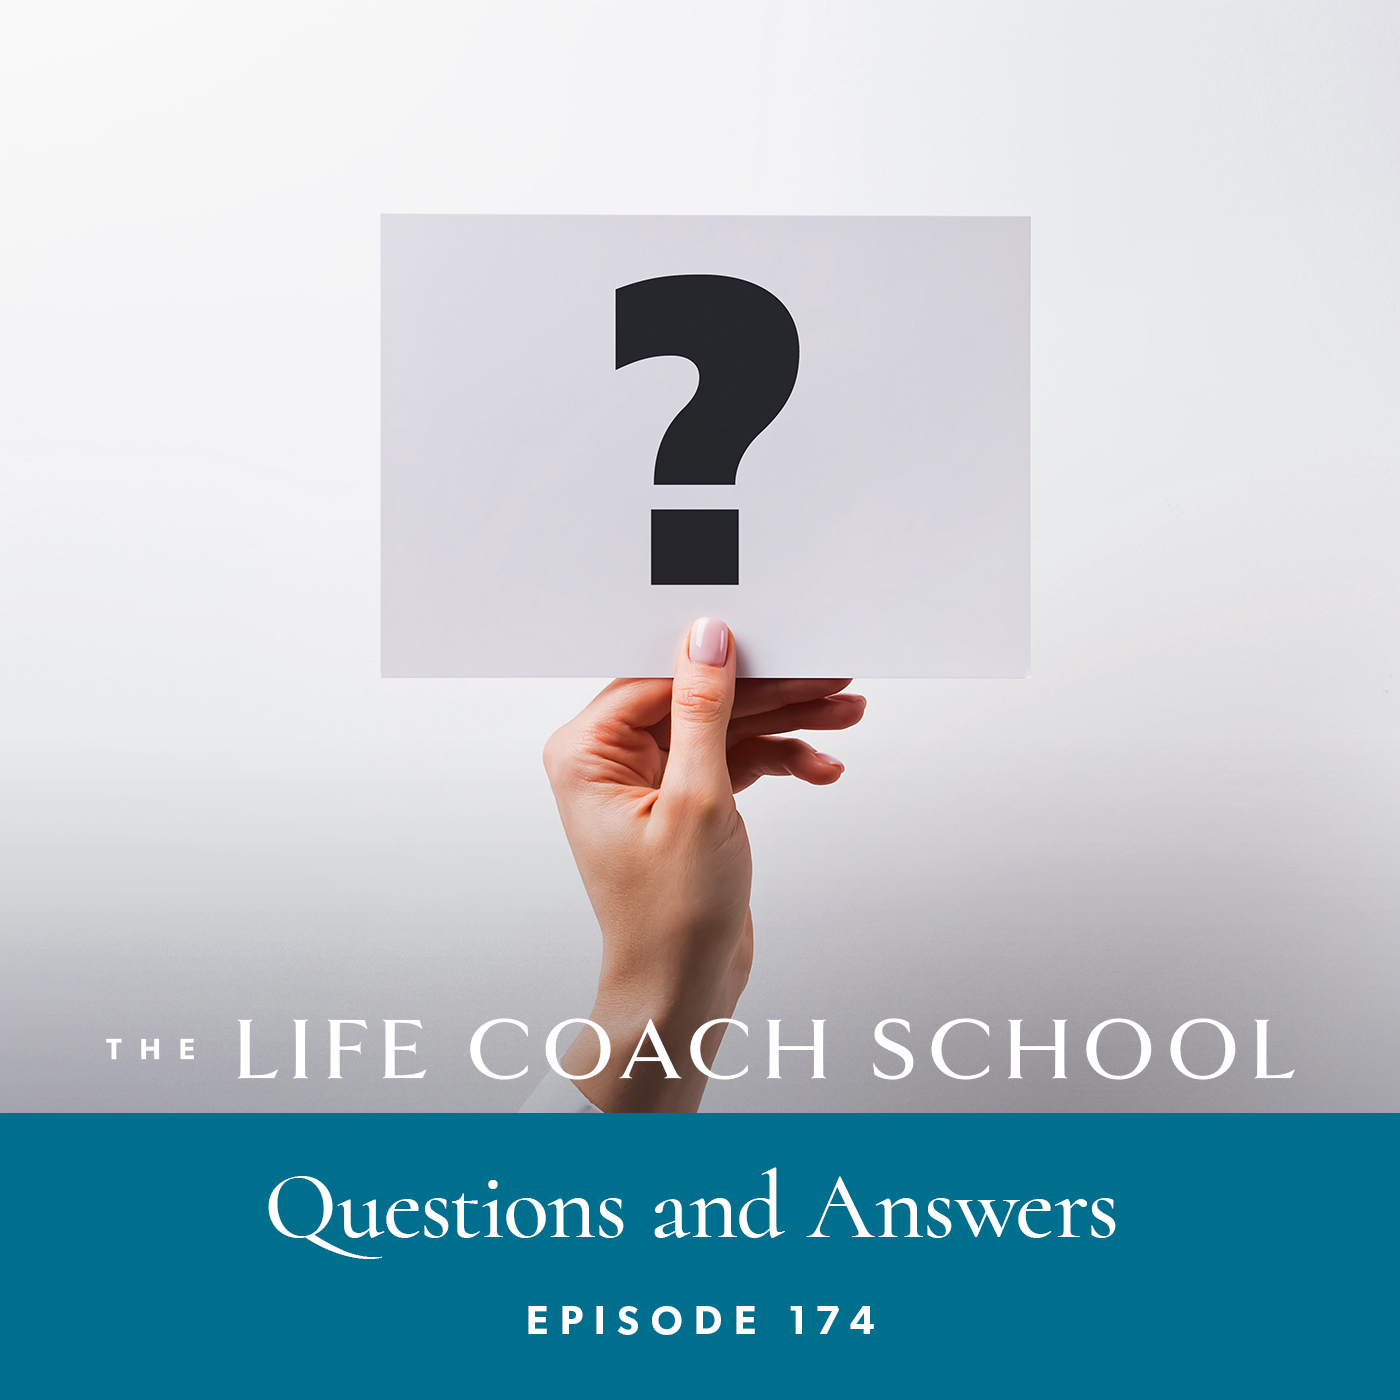 The Life Coach School Podcast with Brooke Castillo | Episode 174 | Questions and Answers